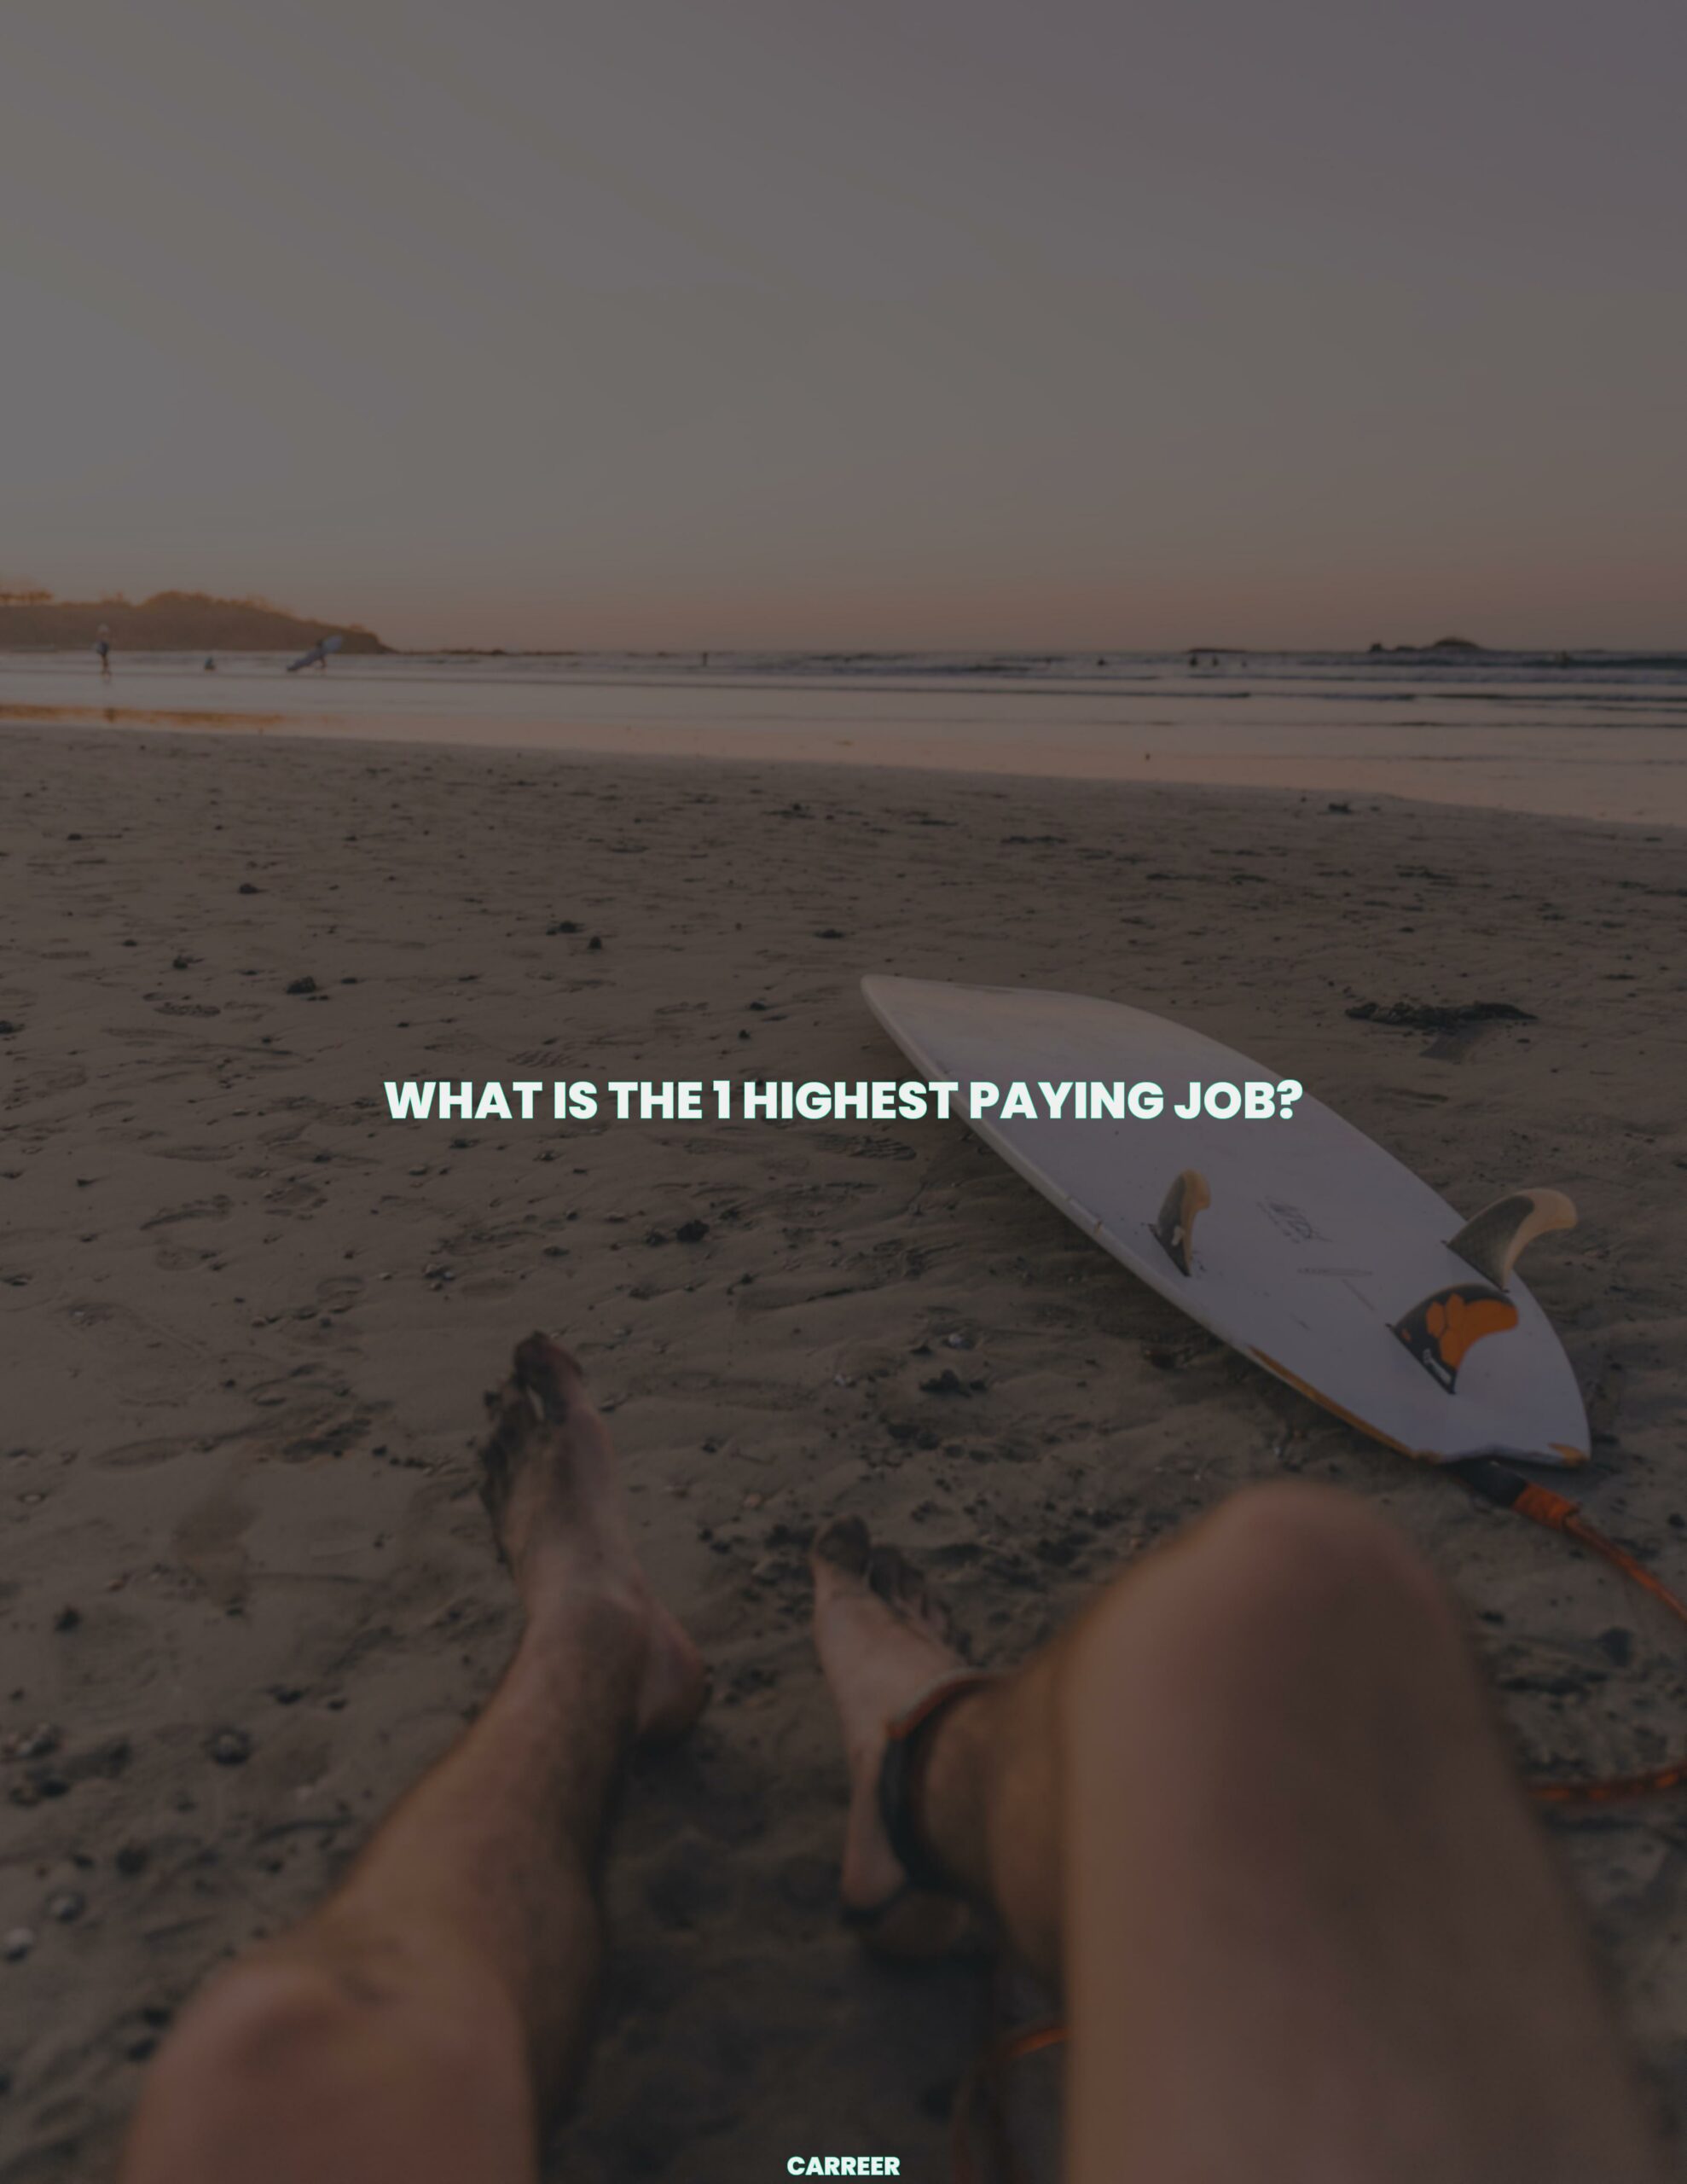 What is the 1 highest paying job?